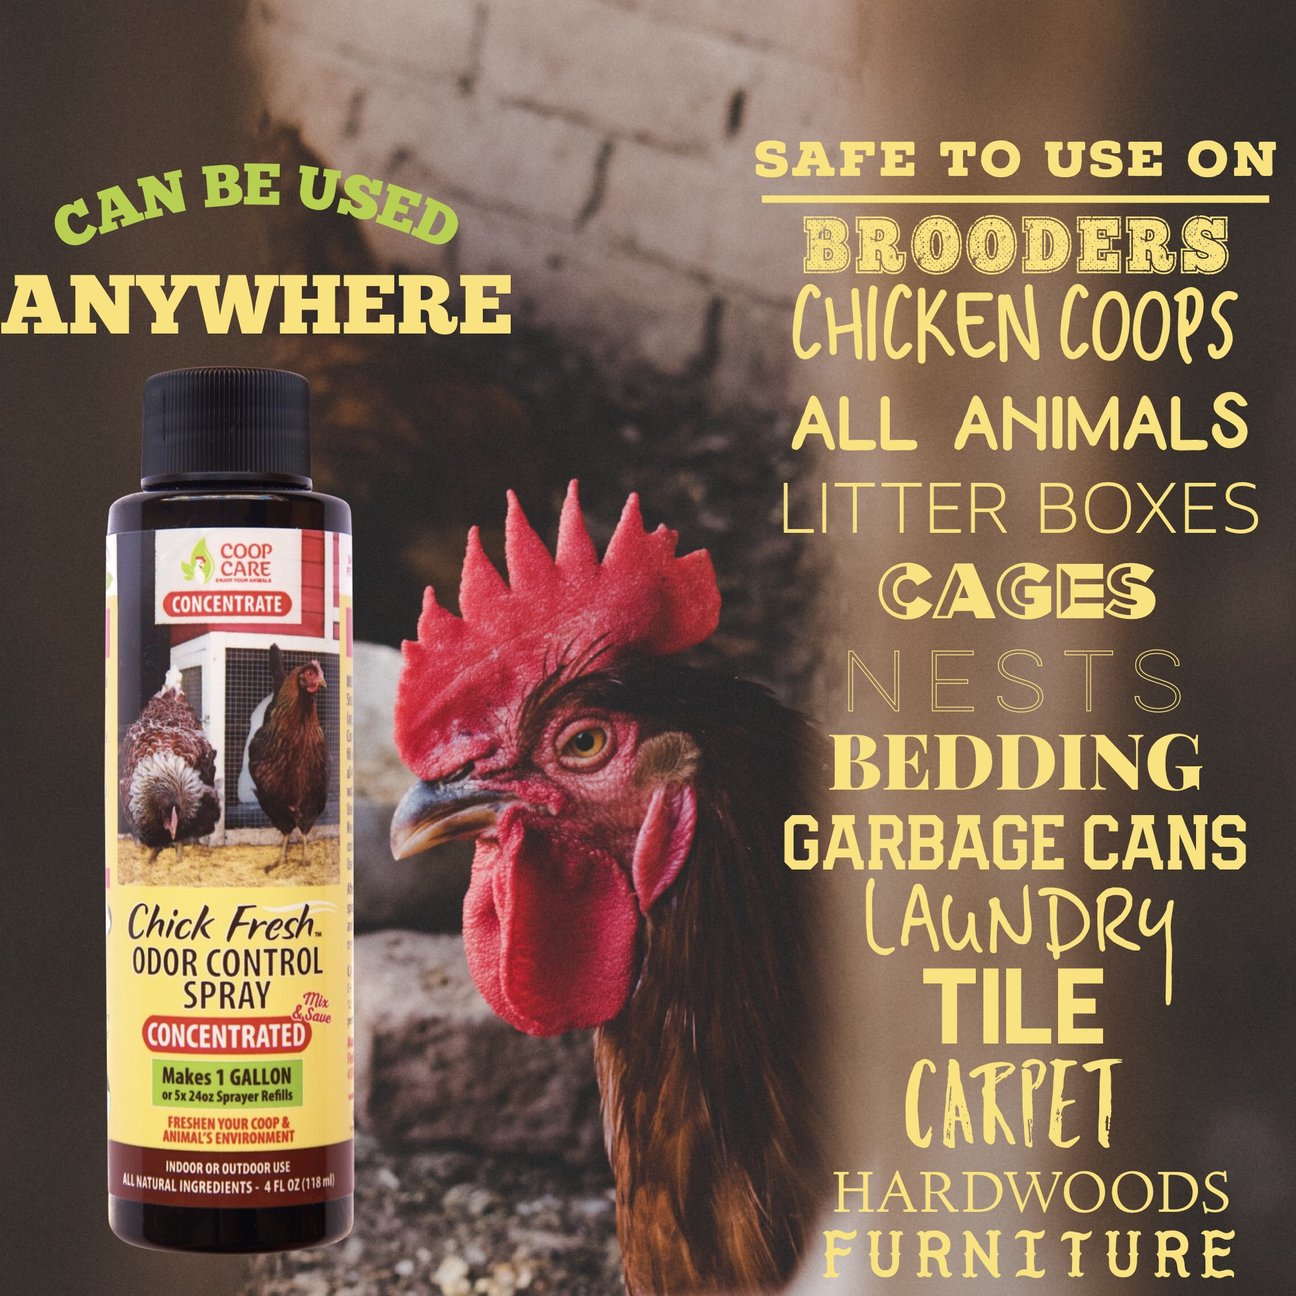 Chick Fresh Concentrate - Eliminate Odors in Brooder, Coop, Litter Box, etc. FREE 24 oz. Sprayer - FlexTran Animal Care